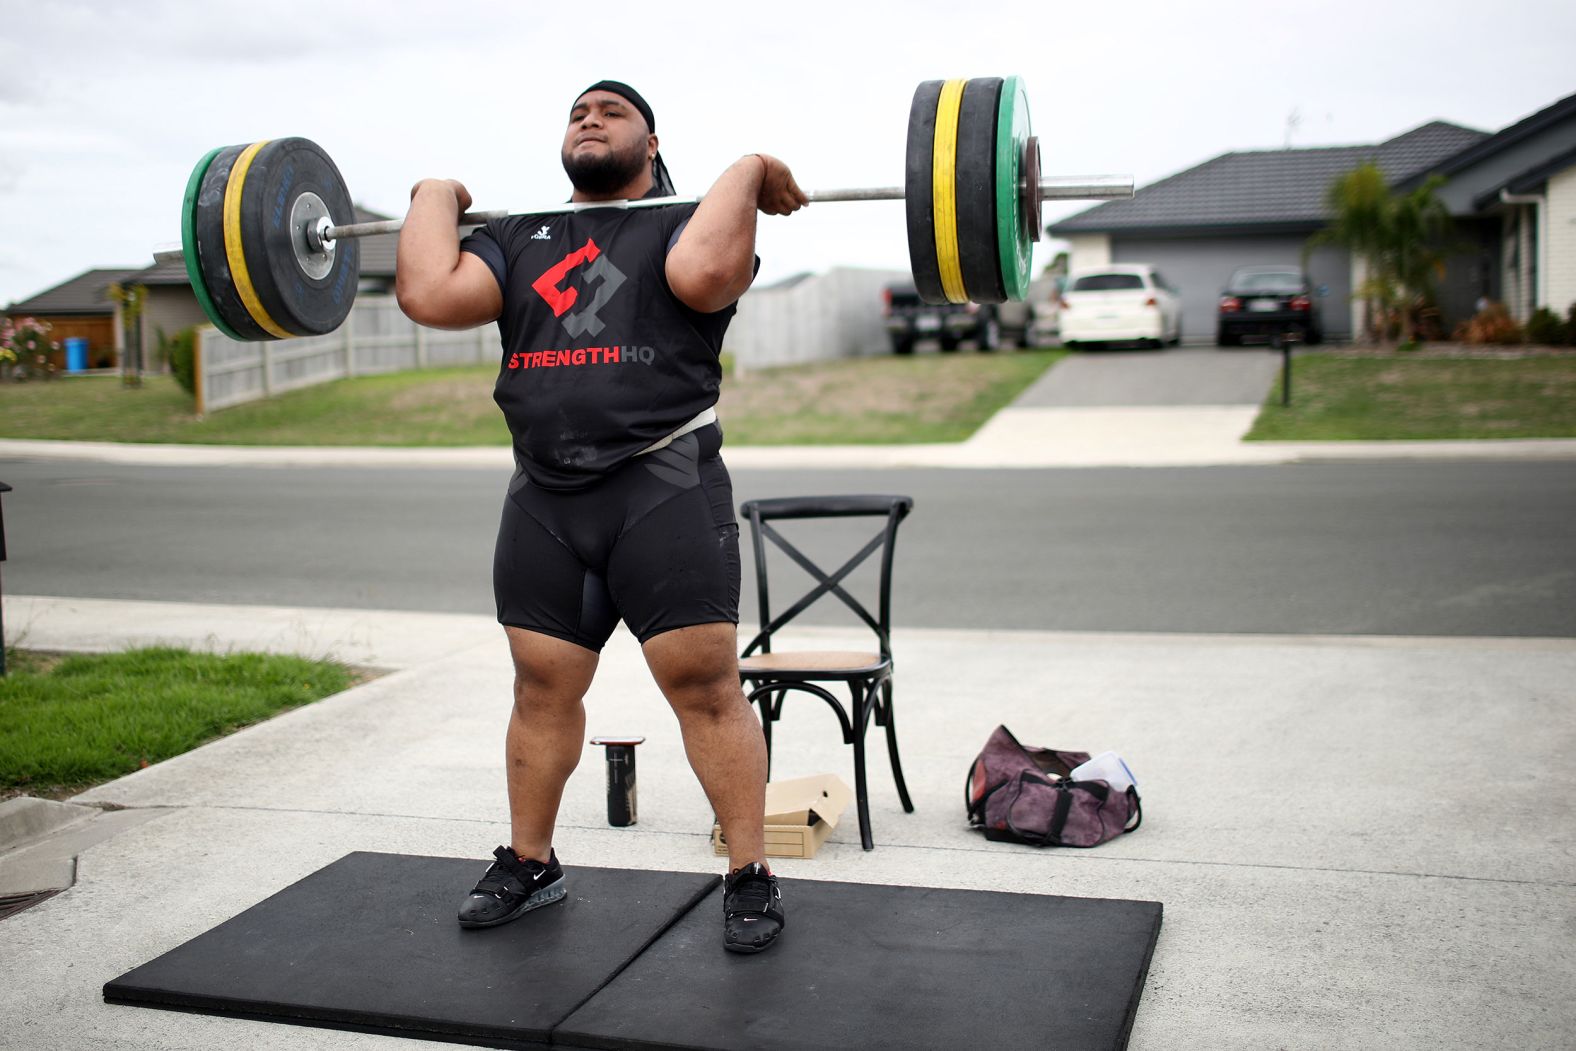 Weightlifter David Liti, who won gold at the 2018 Commonwealth Games, lifts in his driveway in Te Kauwhata, New Zealand, on April 8.